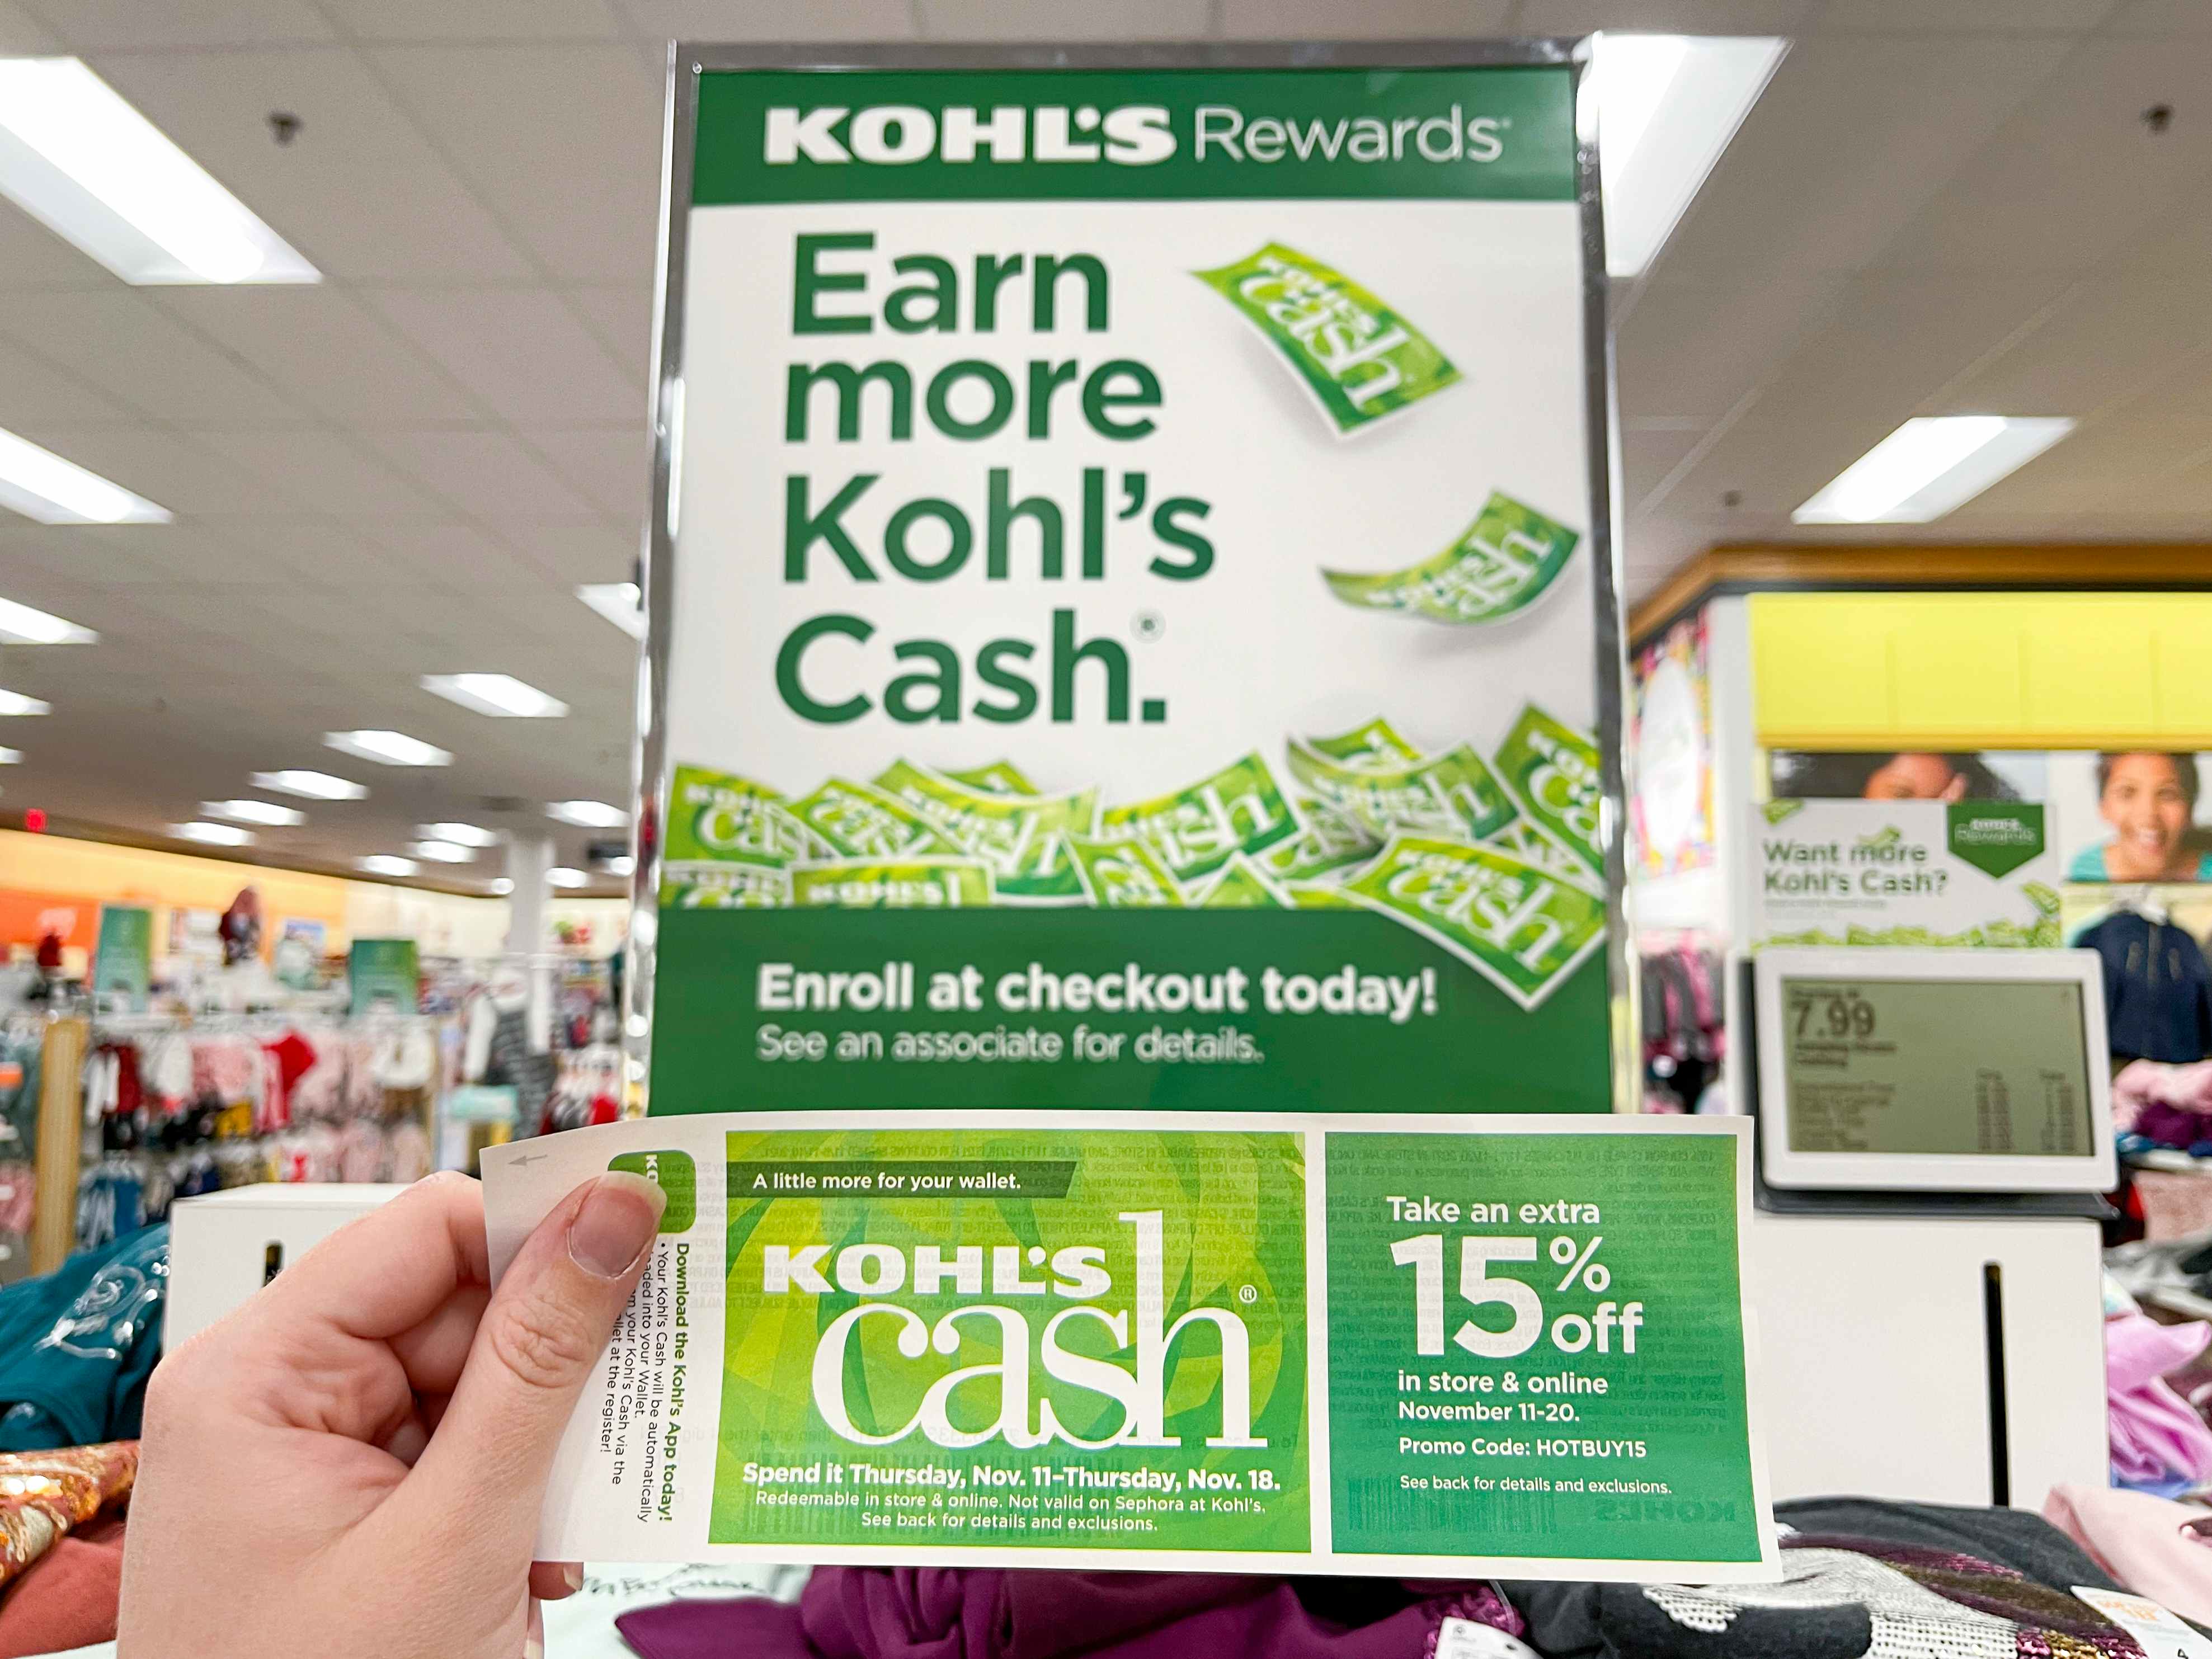 Expired] Kohl's Rewards - Negative Changes Coming 7/22 - Doctor Of Credit